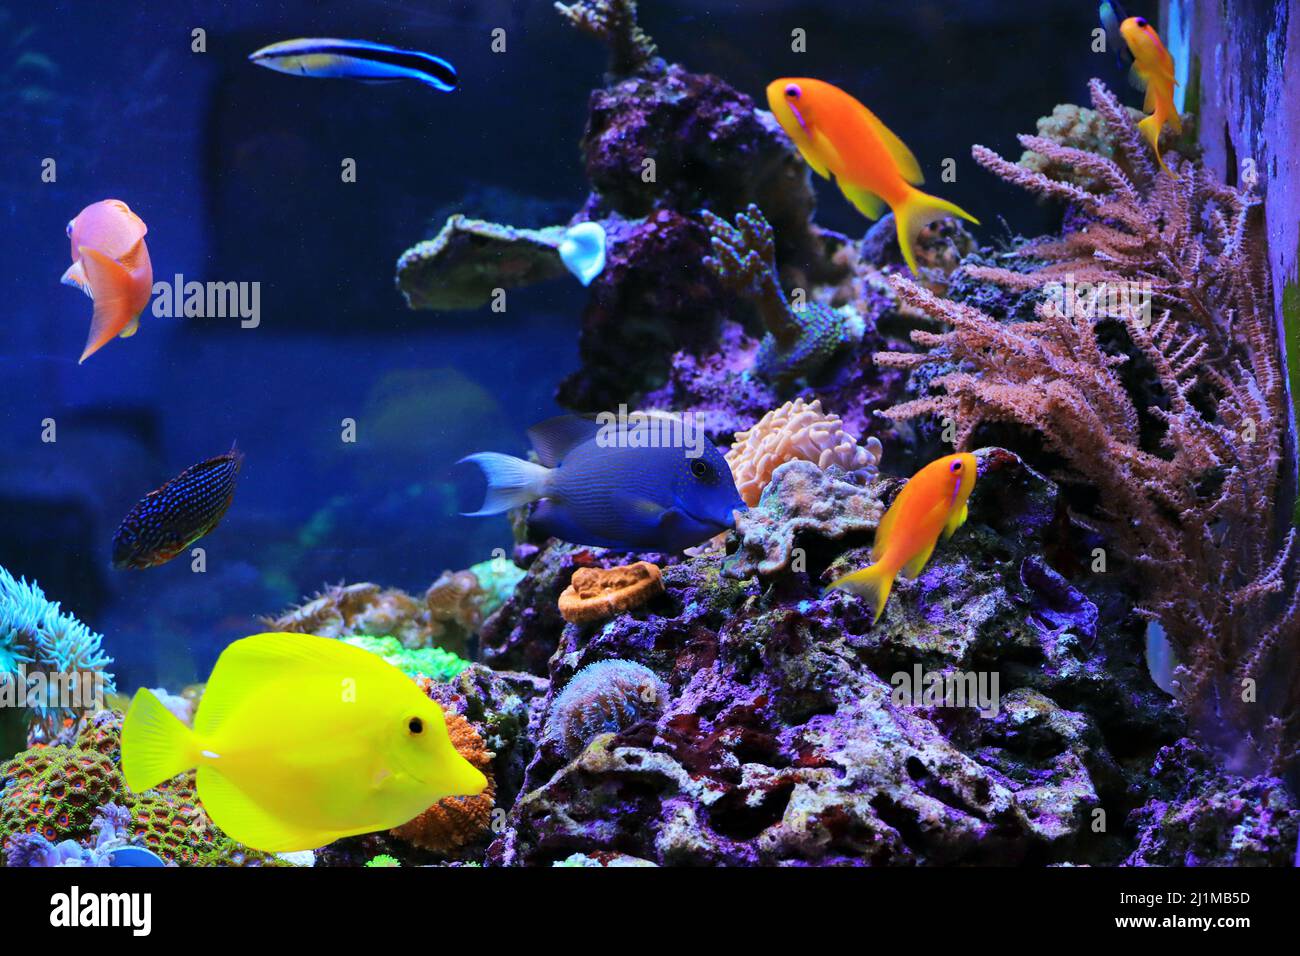 Beautiful symbiosis of group of fishes in coral reef aquarium tank Stock Photo